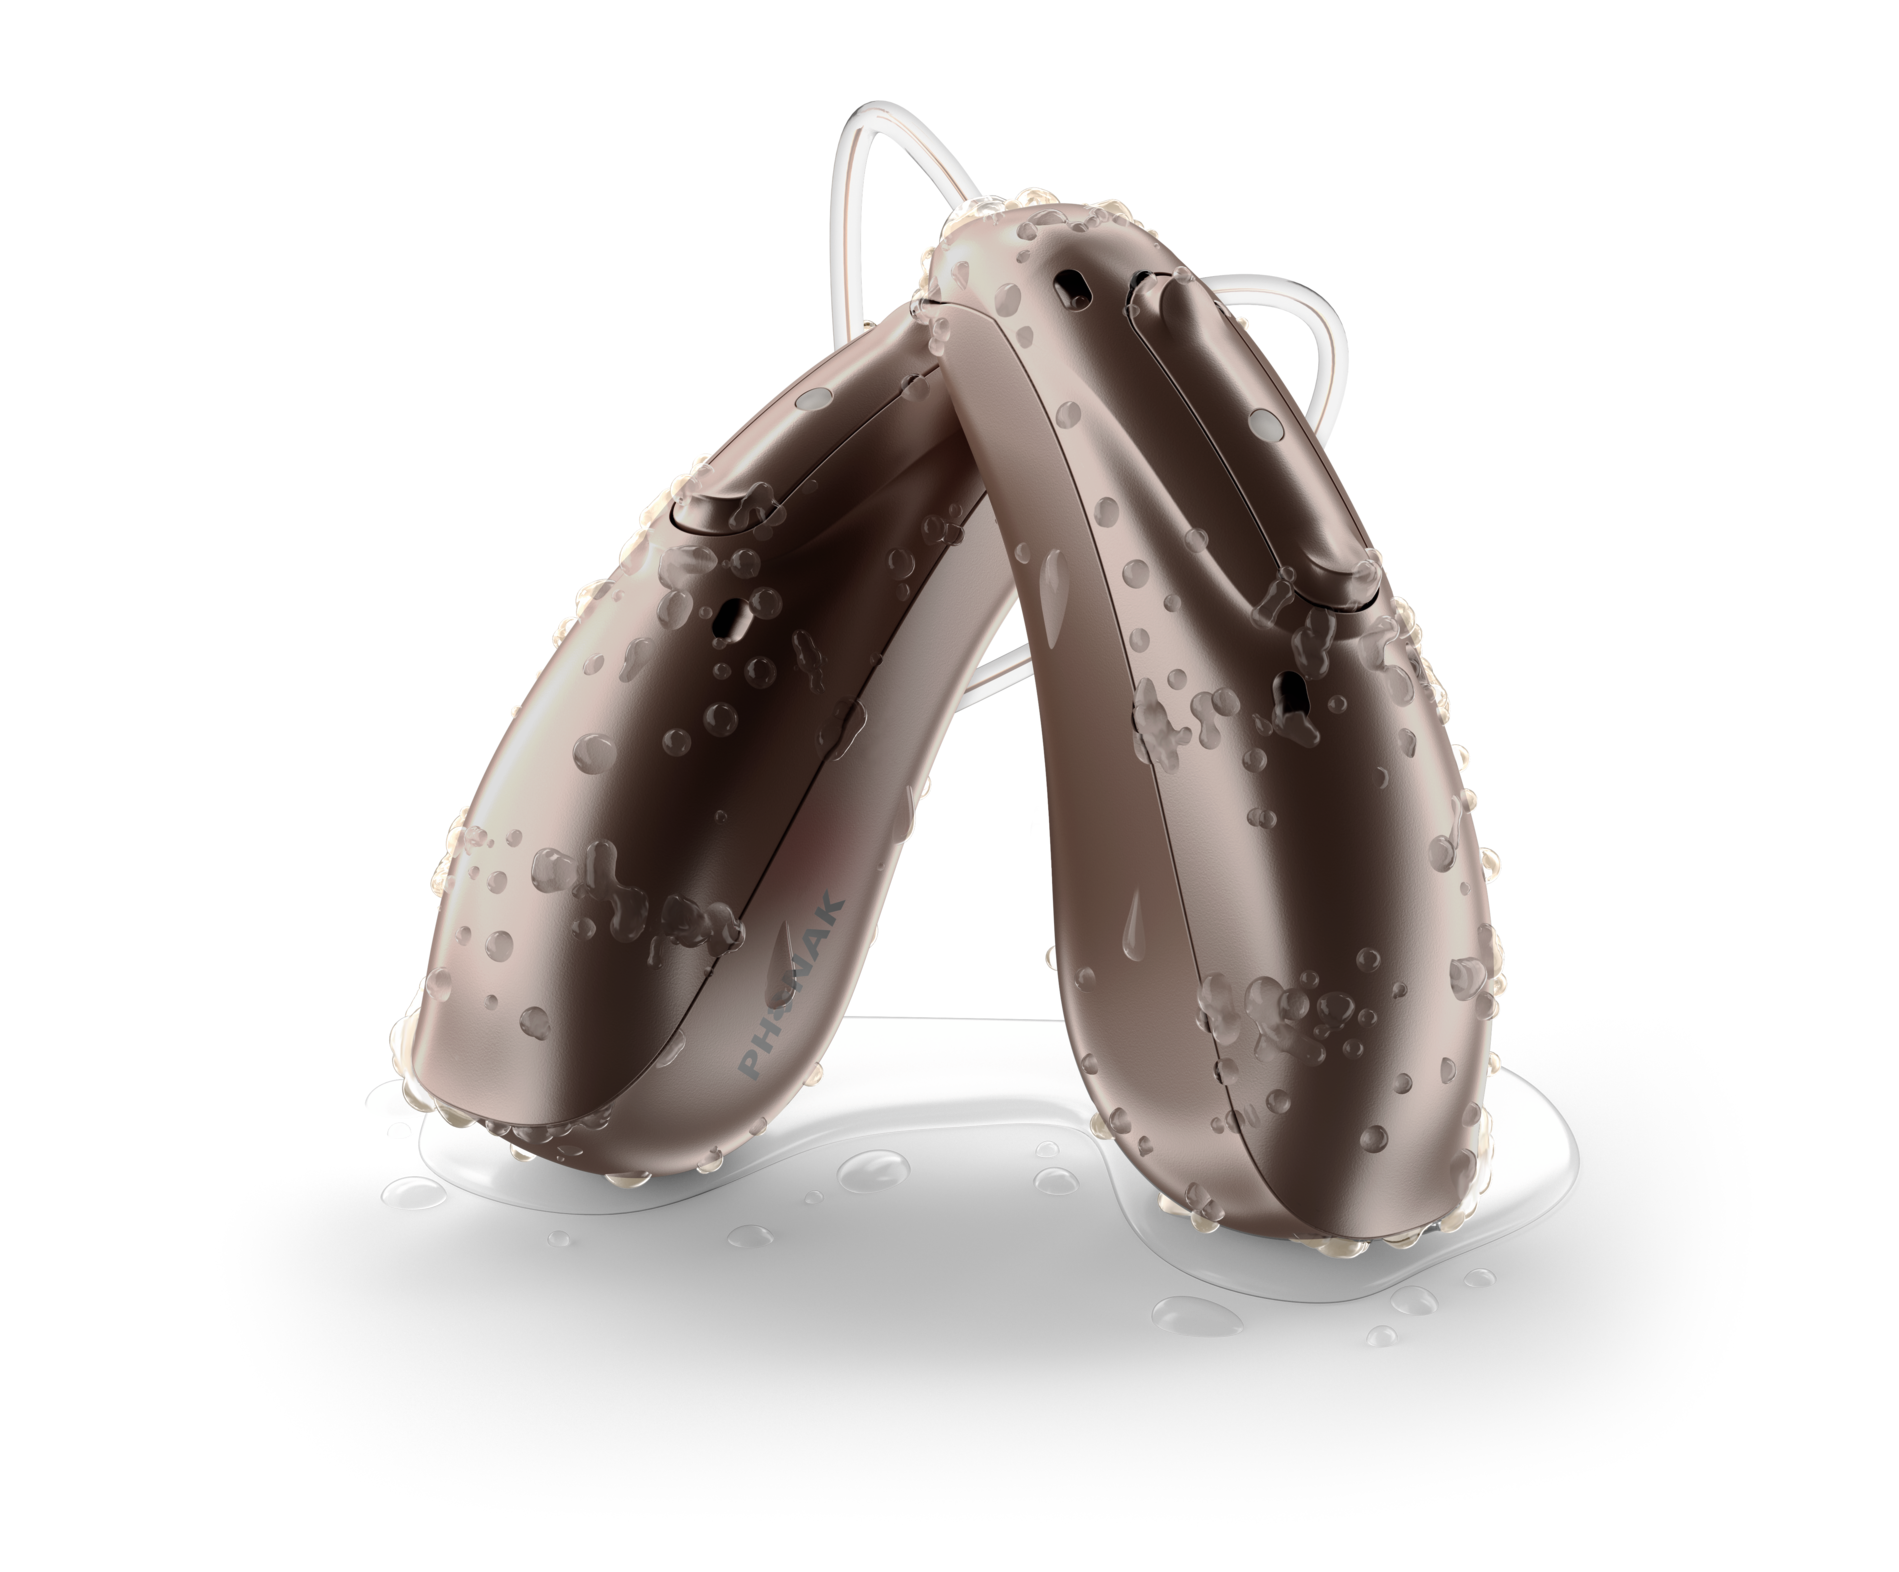 Phonak Audeo Life Lumity hearing aids covered with water droplets.